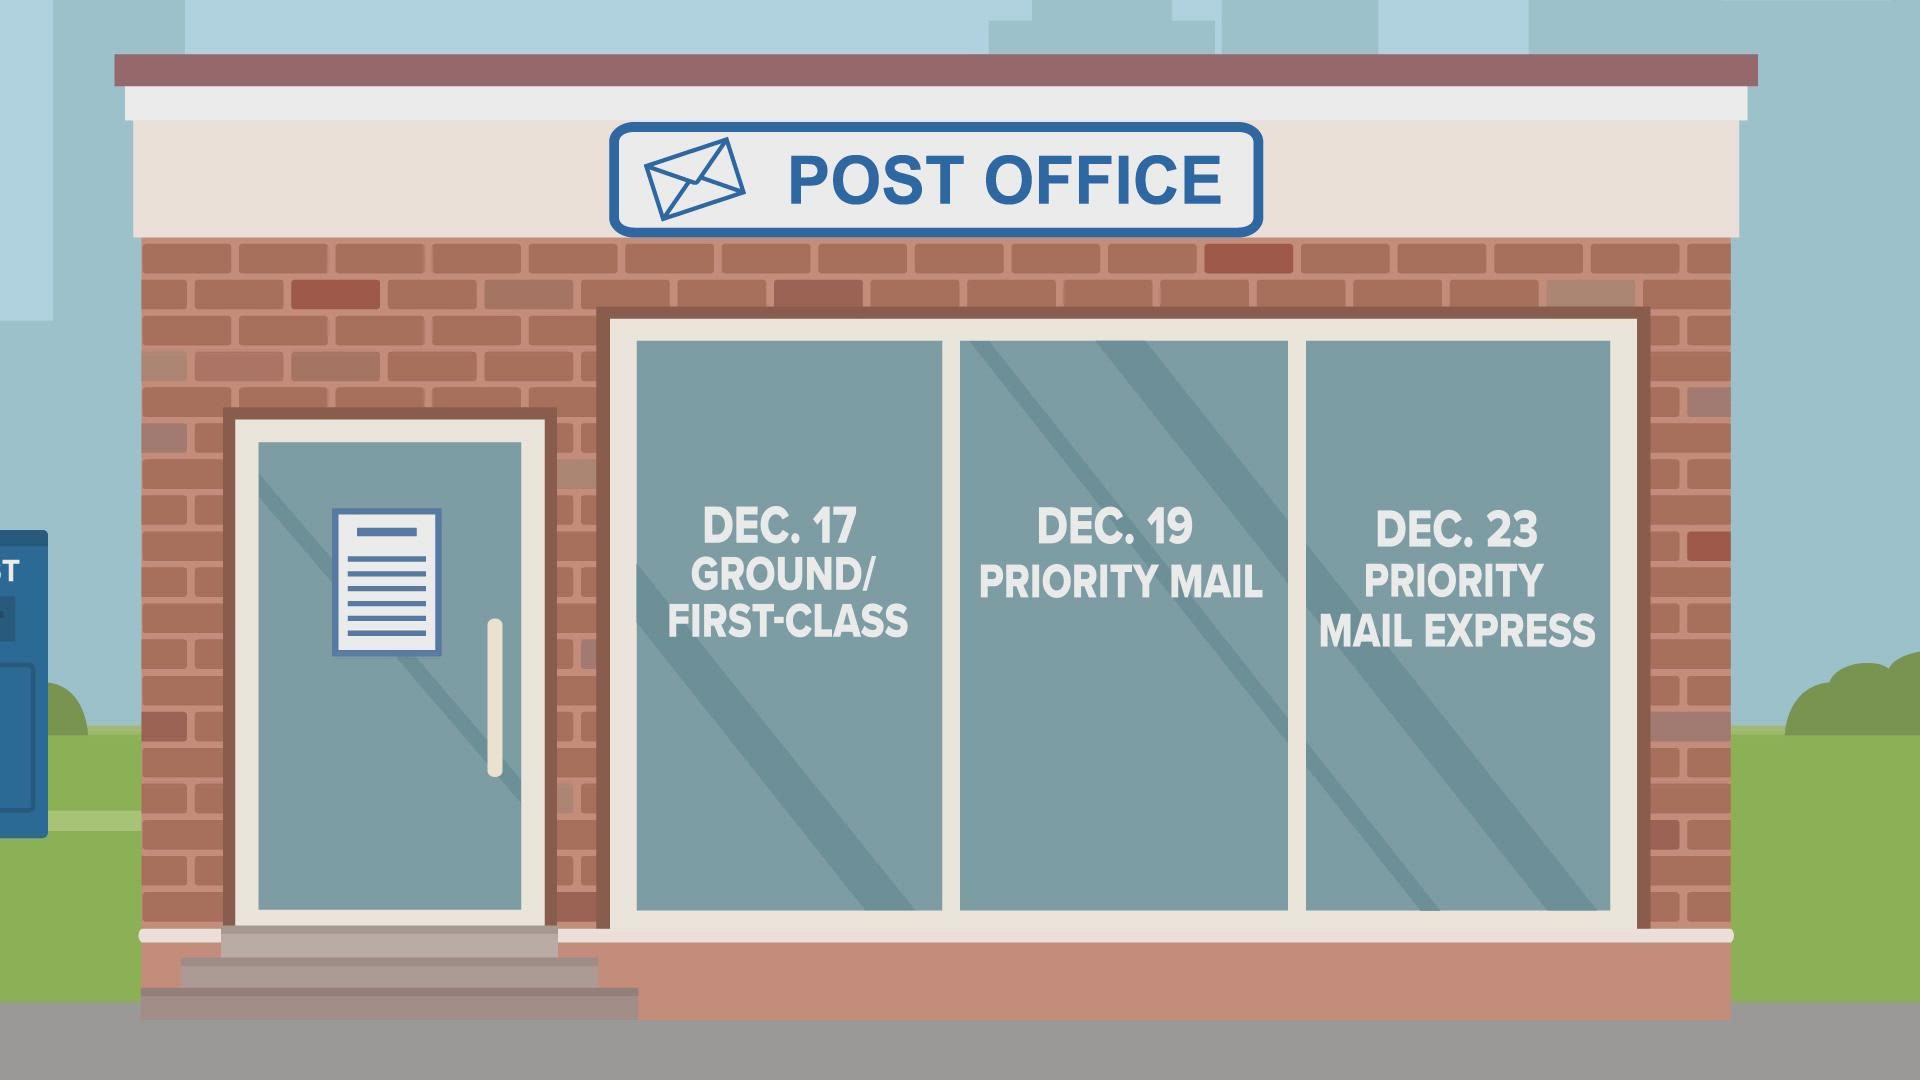 If you're shipping holiday gifts, you need to remember these deadlines.